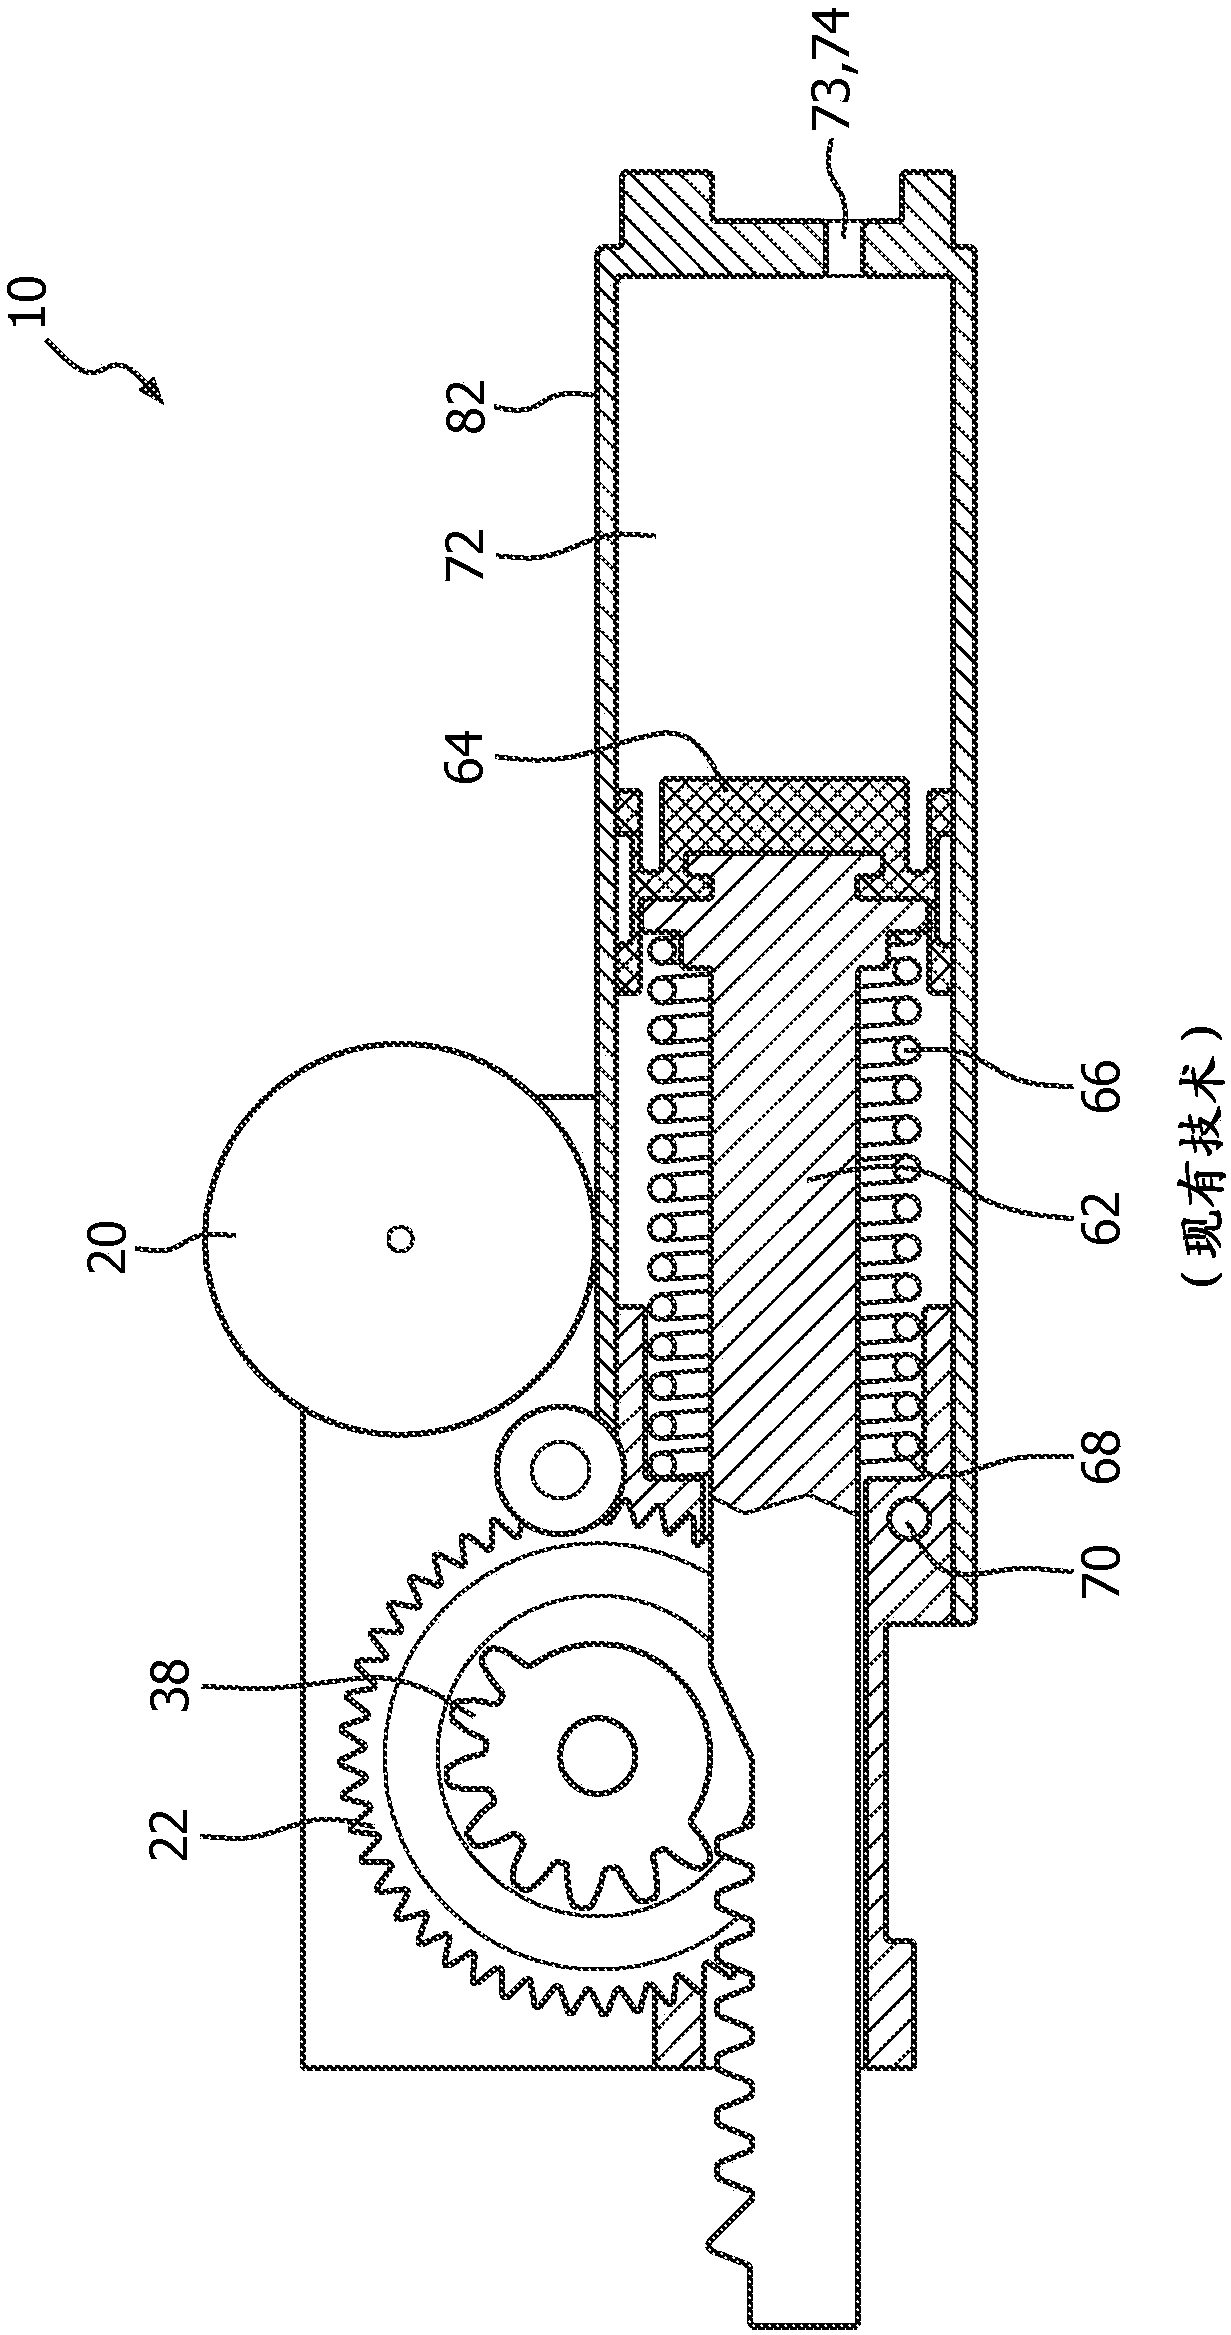 Semi-free rotating crankshaft actuator to pre-stress and fast release spring loadable plunger for oral healthcare appliance